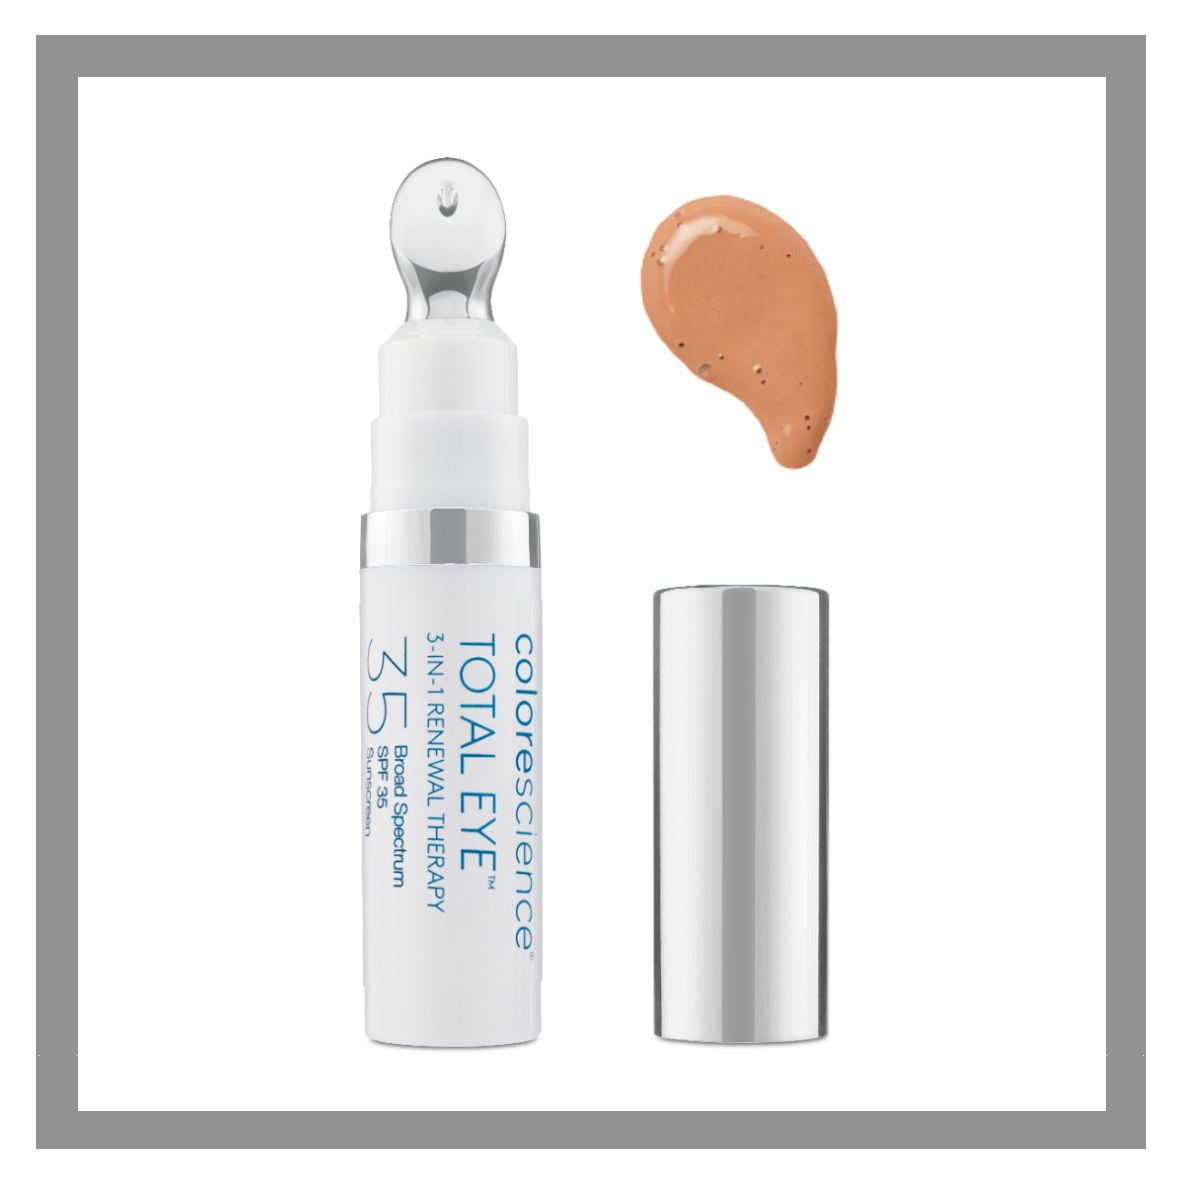 Colorescience 3 in 1 Total Eye Renewal Therapy SPF 35